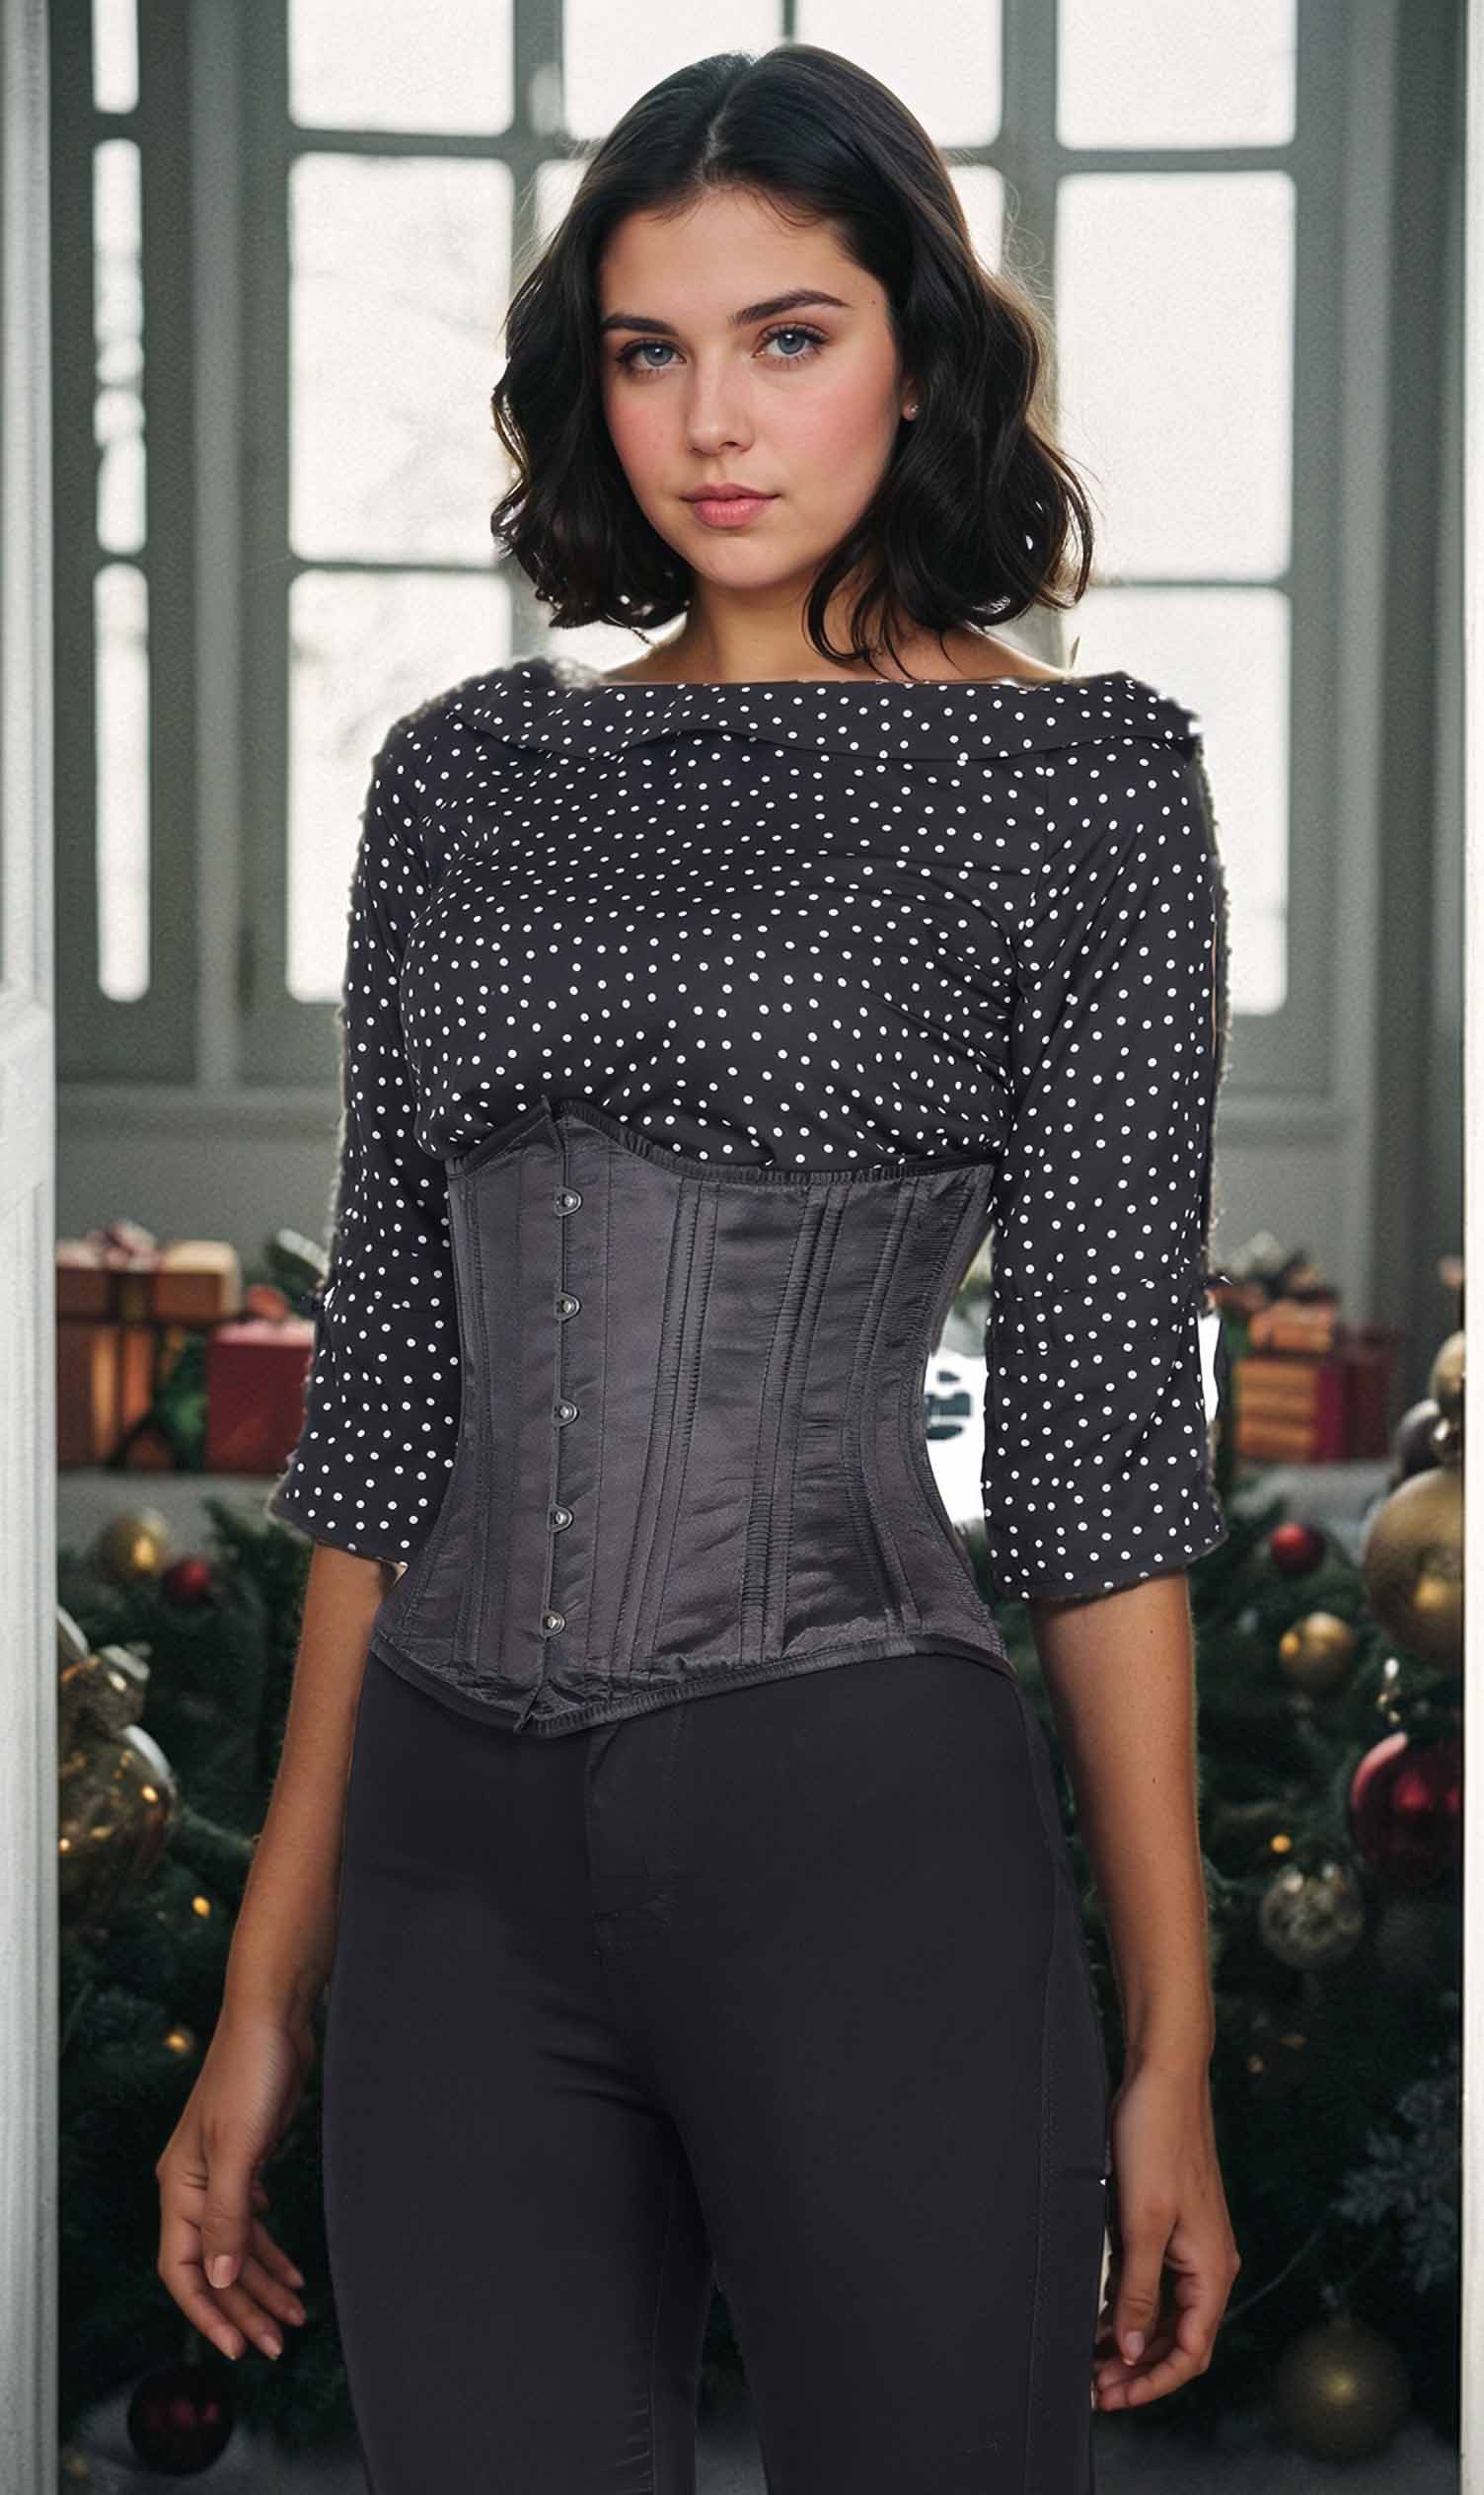 Beautiful Waist Trainer order at  coupon